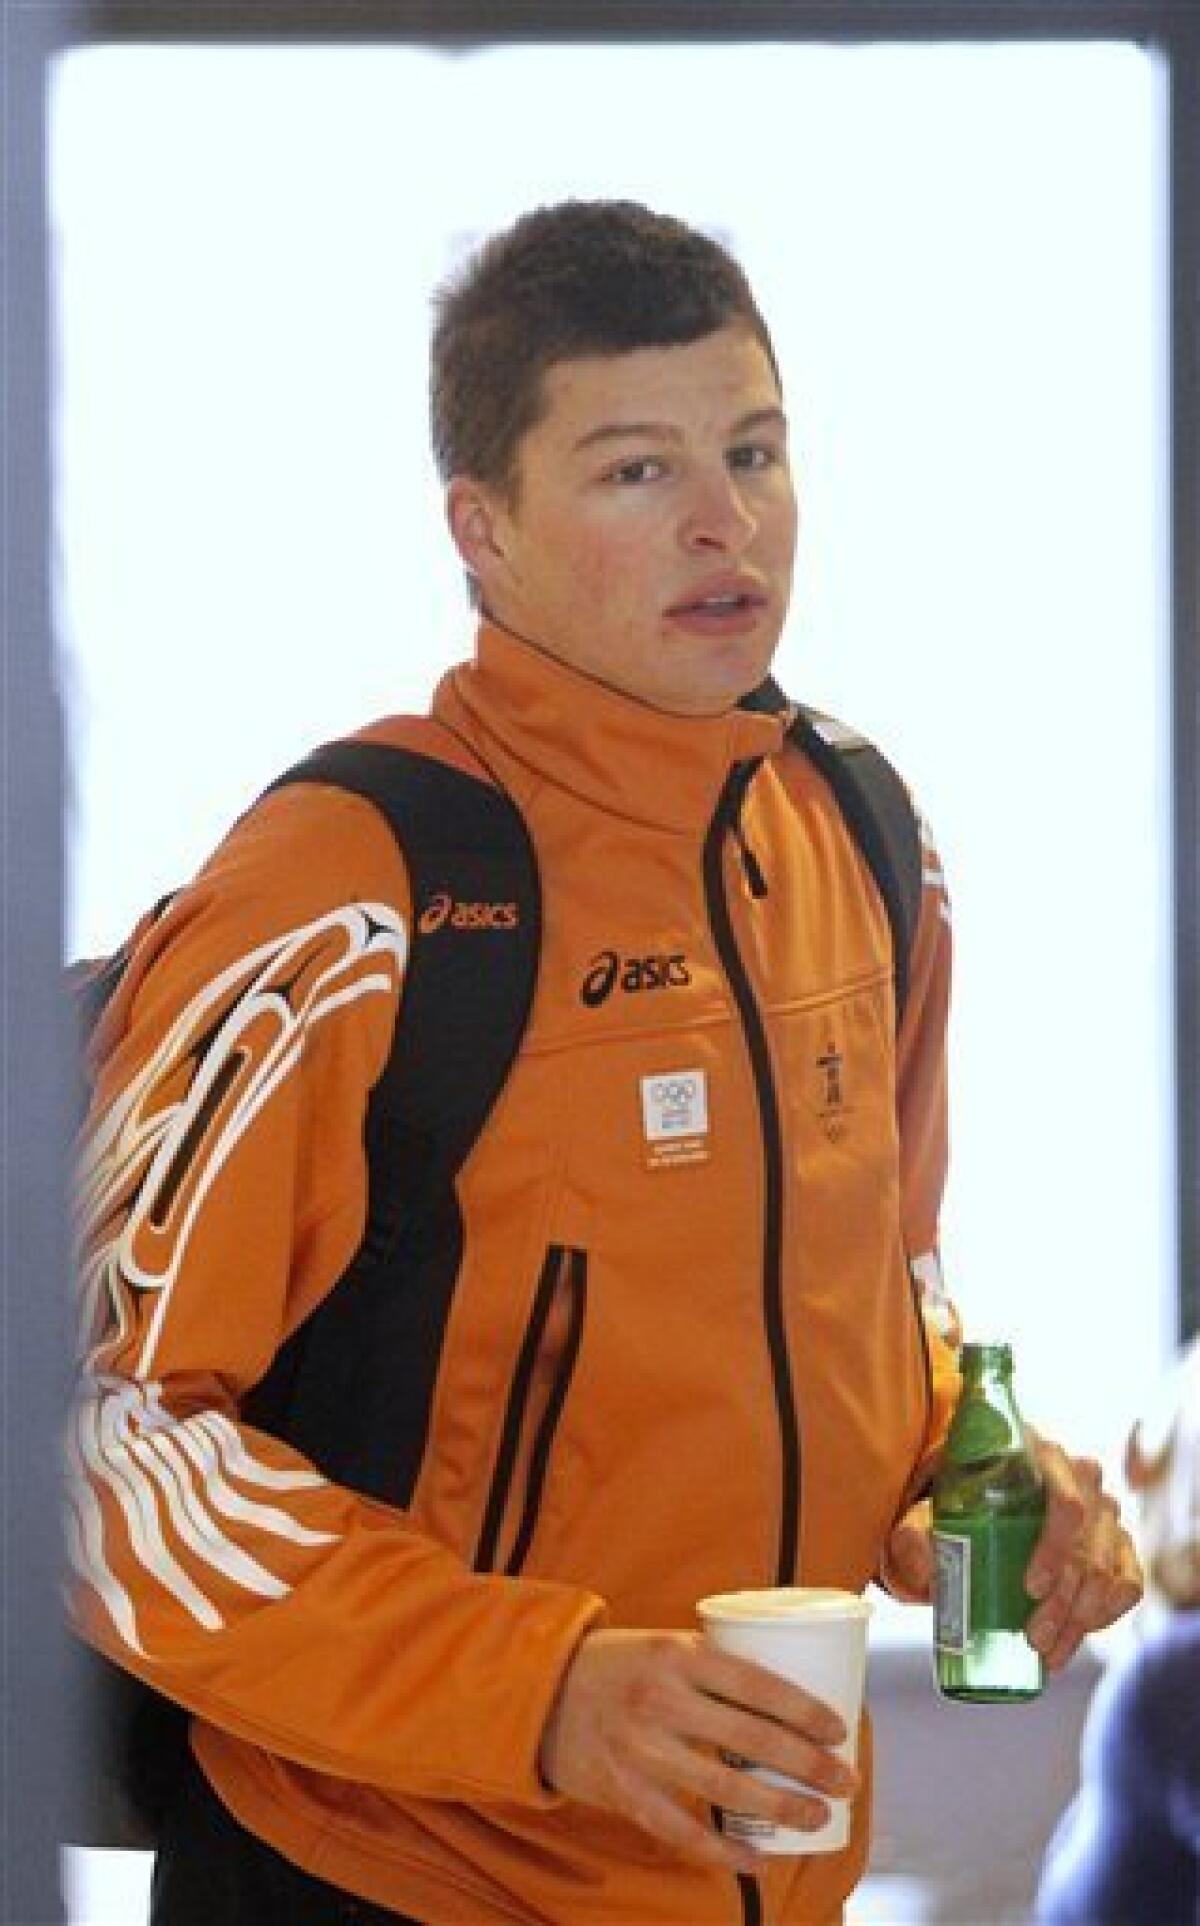 Dutch speed skater Sven Kramer holds refreshments in a hotel lobby in Richmond, at the Vancouver 2010 Olympics in Vancouver, British Columbia, Wednesday, Feb. 24, 2010. Kramer went through the grueling 10,000-meter race Tuesday in what would have been record time, but was disqualified for not switching lanes while coming out of a turn about two-thirds into the race. Here's the craziest part: Kramer actually made the switch but his coach missed it. Thinking his star was about to make an epic mistake, the coach animatedly motioned for Kramer to switch lanes. Kramer seemed to pause before deciding to follow orders. (AP Photo/Matt Dunham)